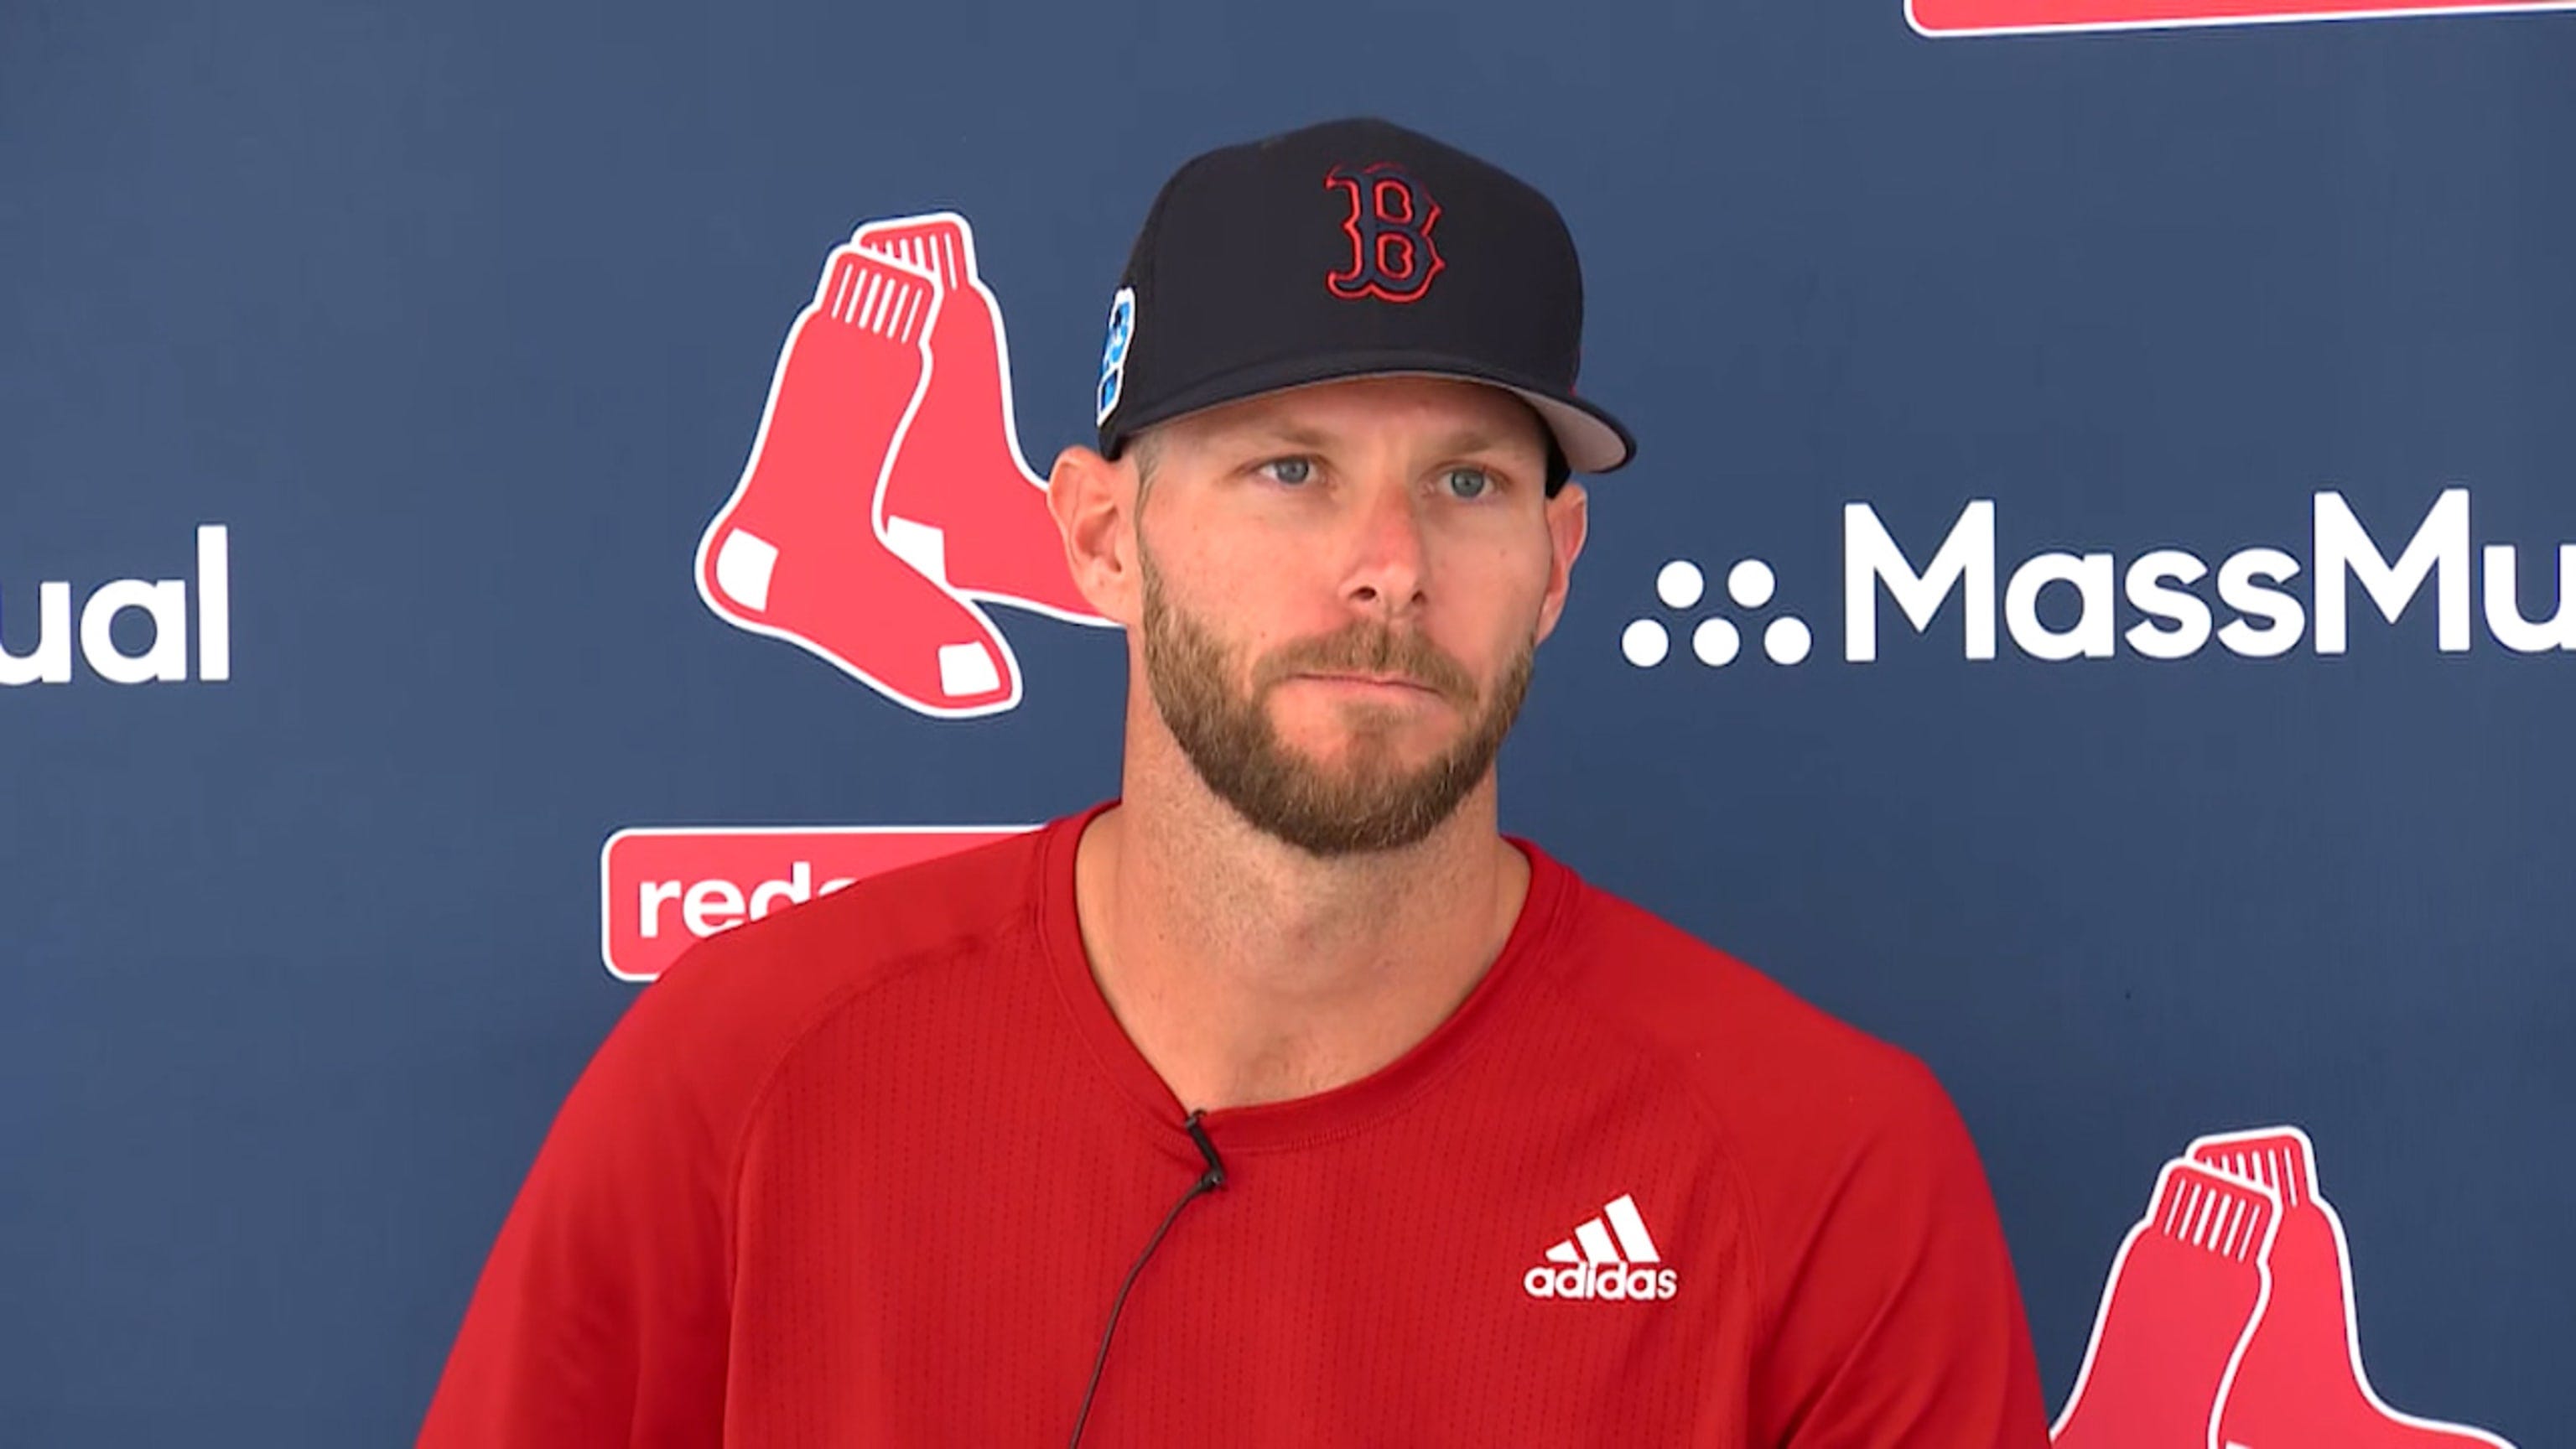 Chris Sale will not start on Opening Day, Alex Cora to announce in